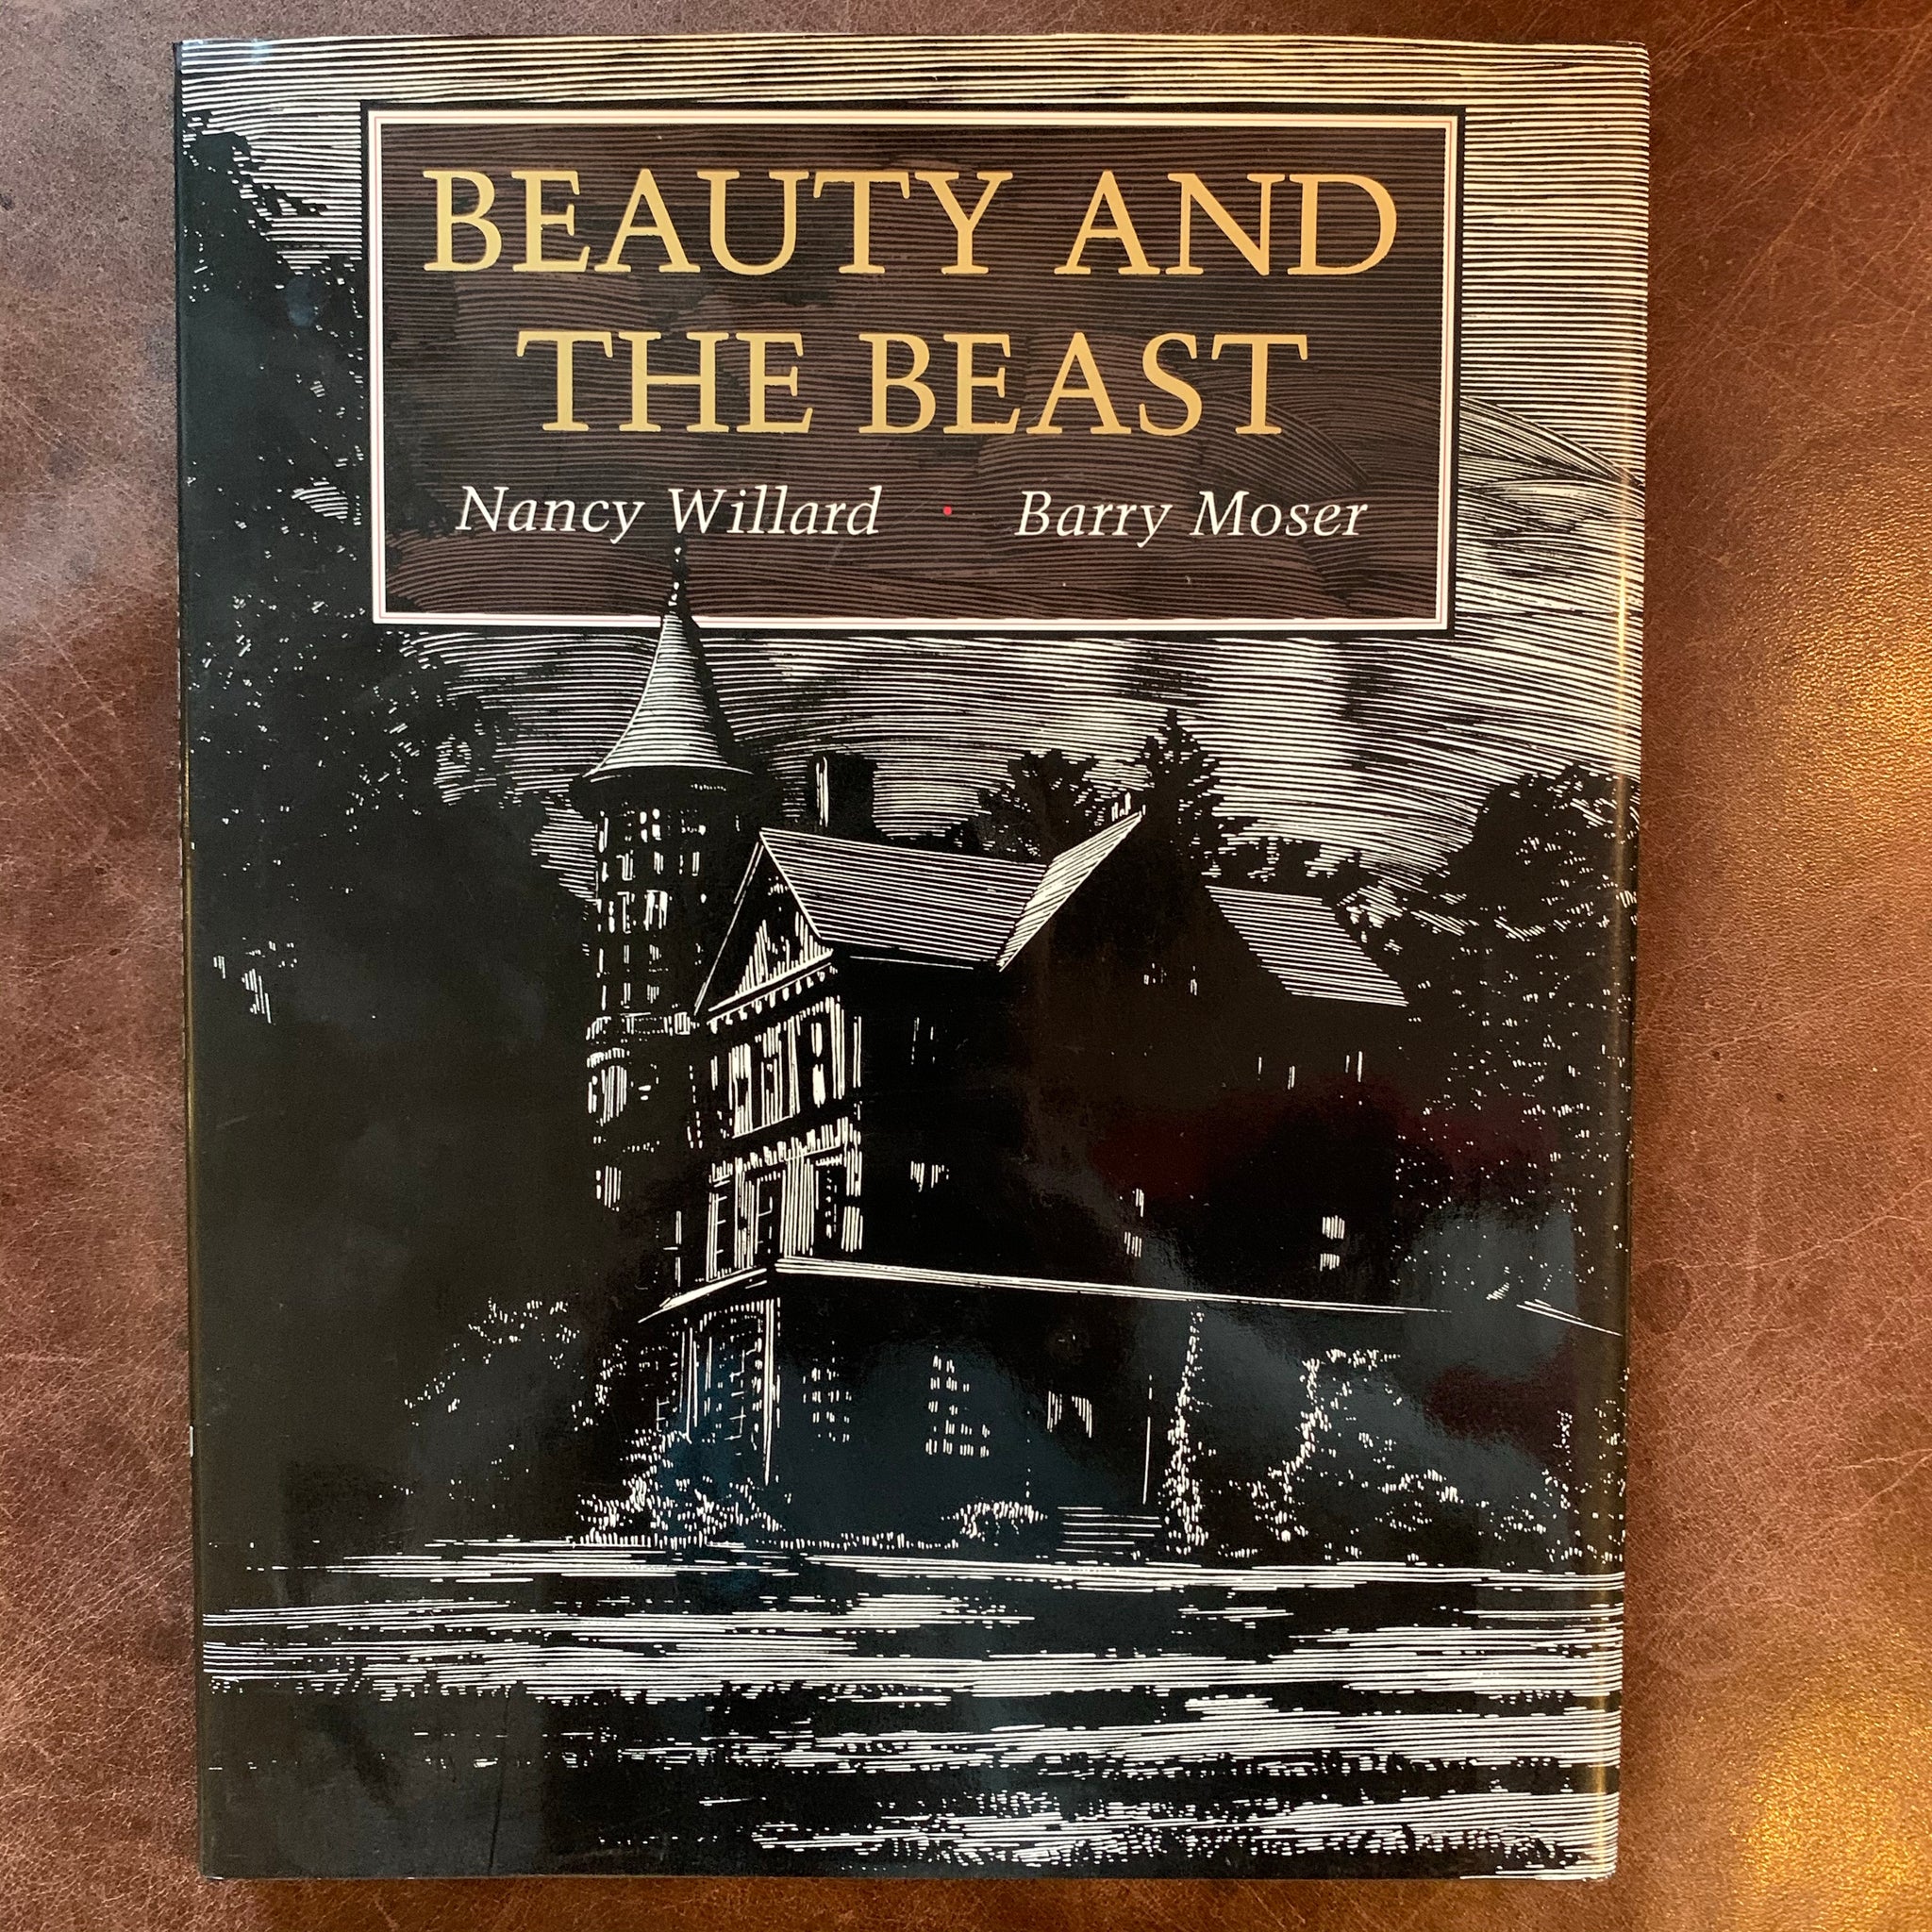 Beauty and the Beast by Nancy Willard signed